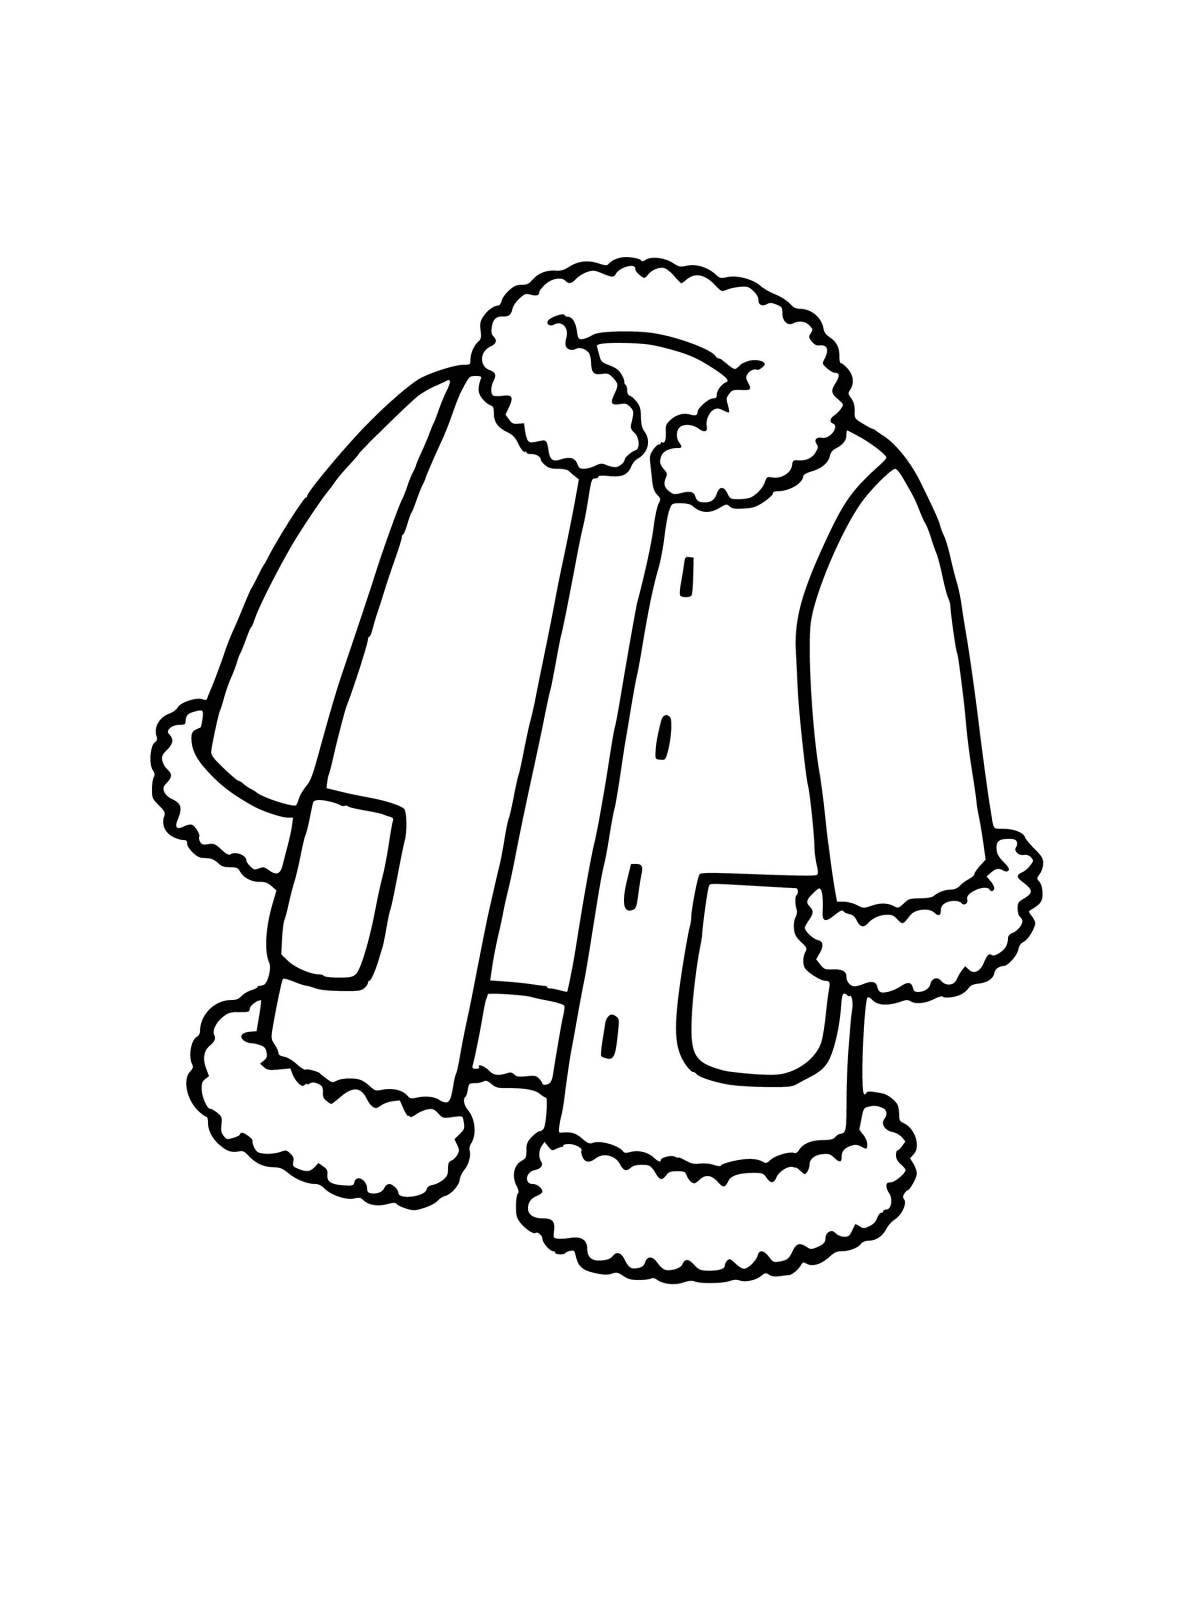 Colorful coat coloring page